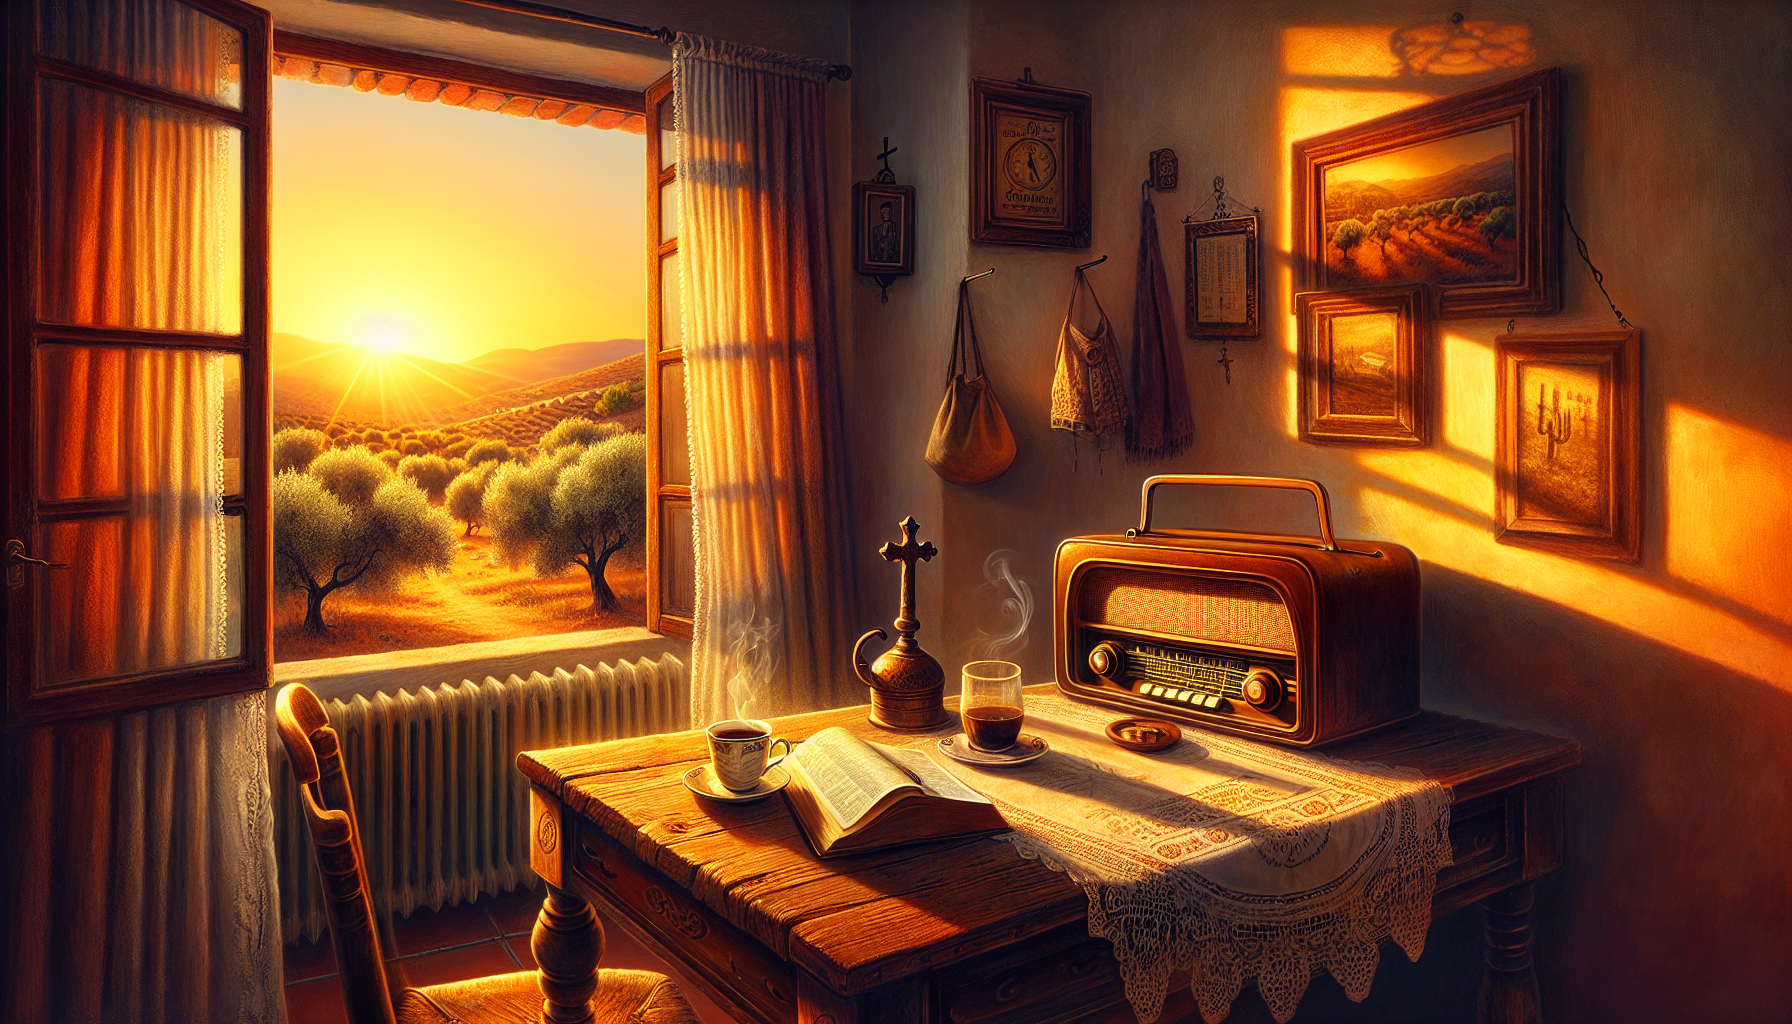 An inviting Spanish landscape at sunset, featuring a rustic wooden table with an old-fashioned radio, a Bible, and a cup of coffee, while soft light filters through a nearby window with sheer curtains